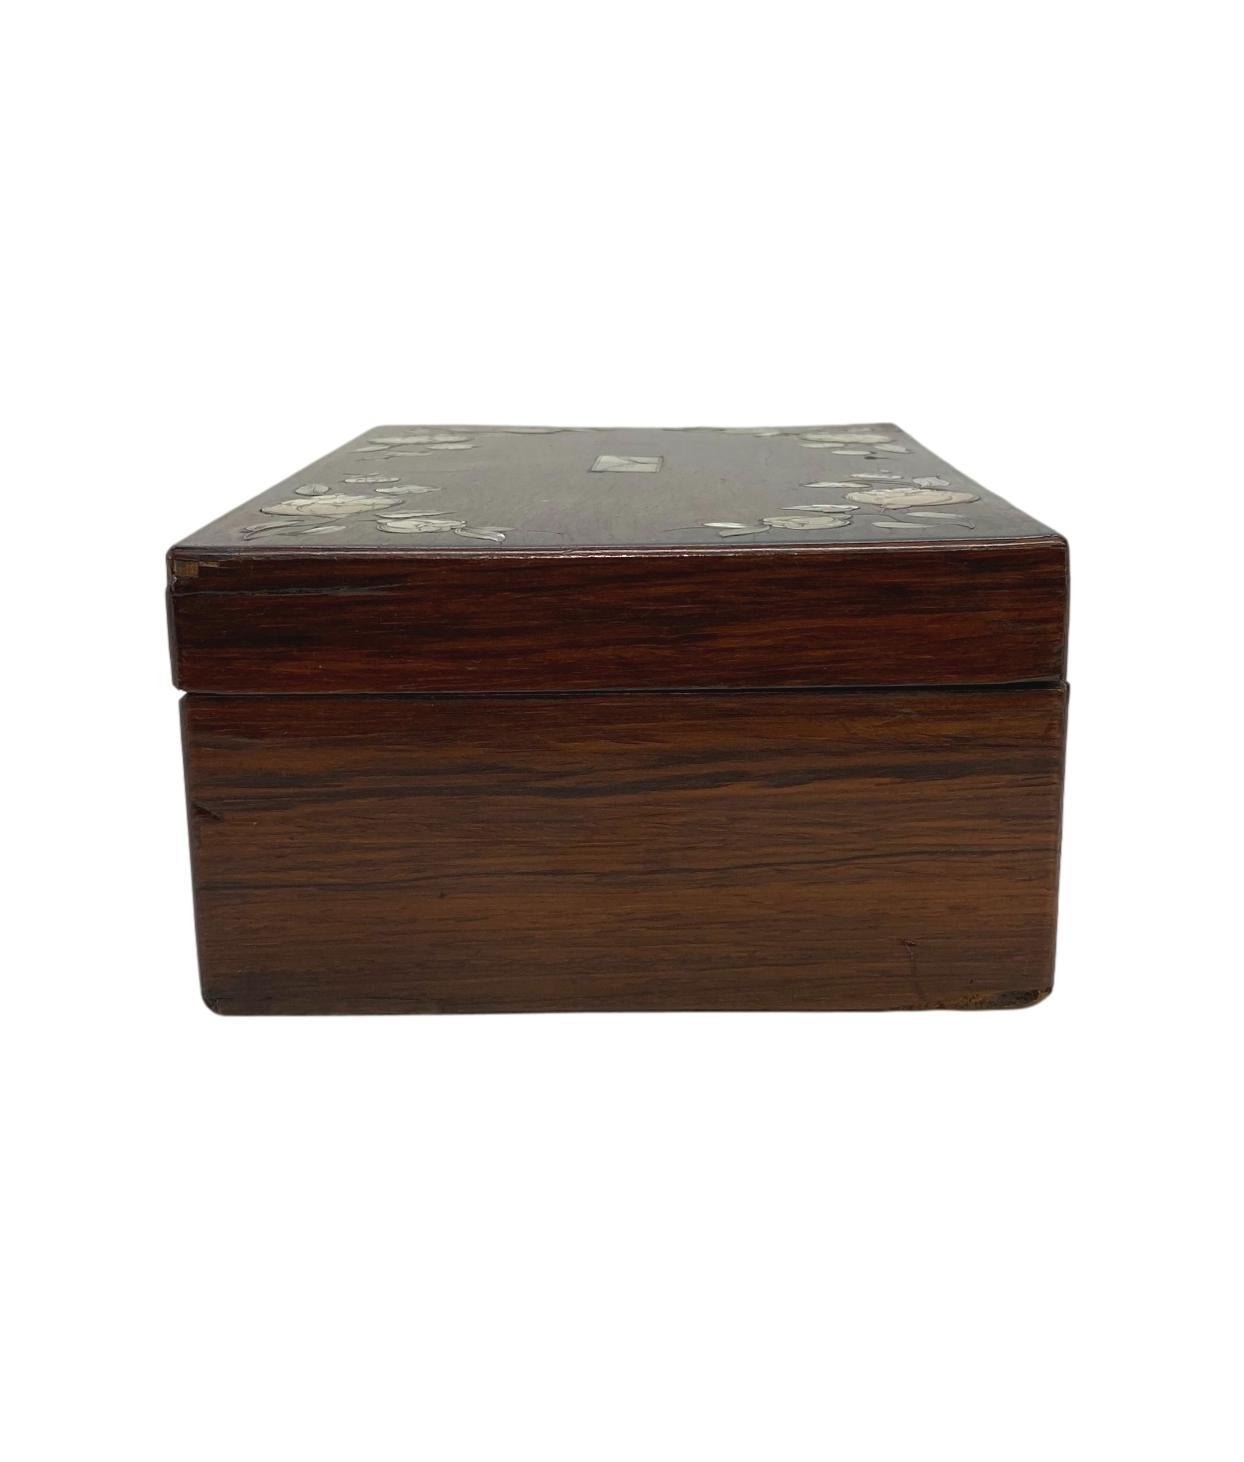 English Rosewood Stationery Box with Fine Inlaid Mother of Pearl Flowers, circa 1840